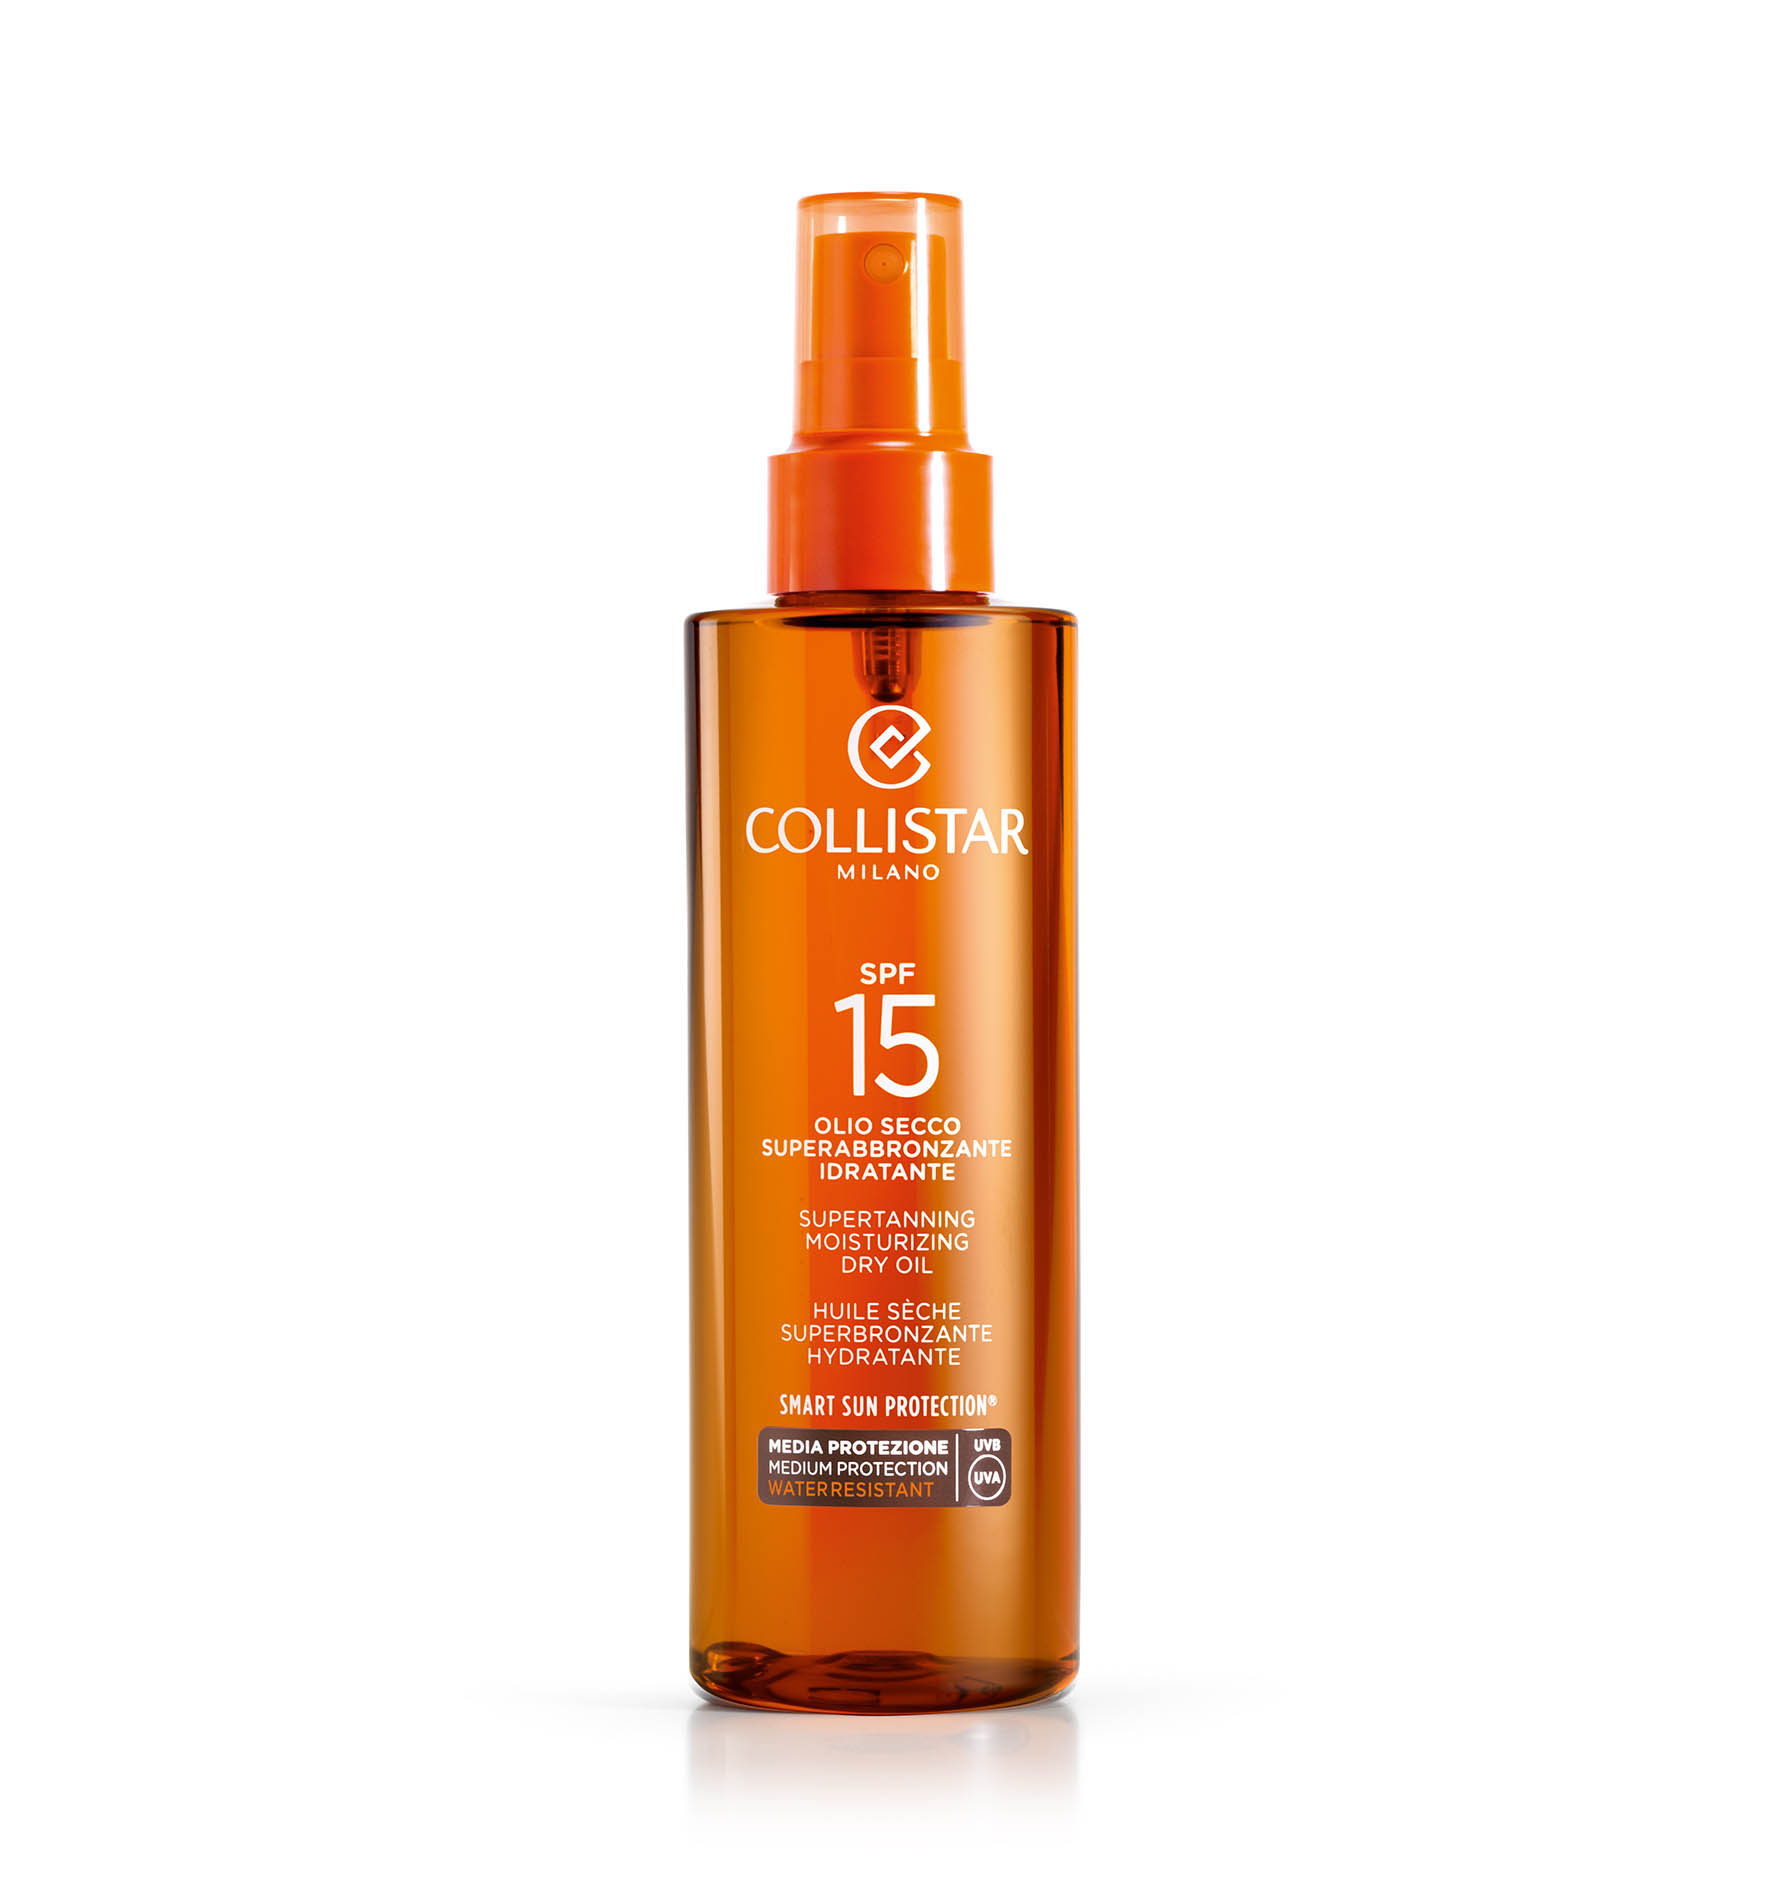 SUPERTANNING DRY OIL SPF 15 - PROTECTION | Collistar - Shop Online Ufficiale